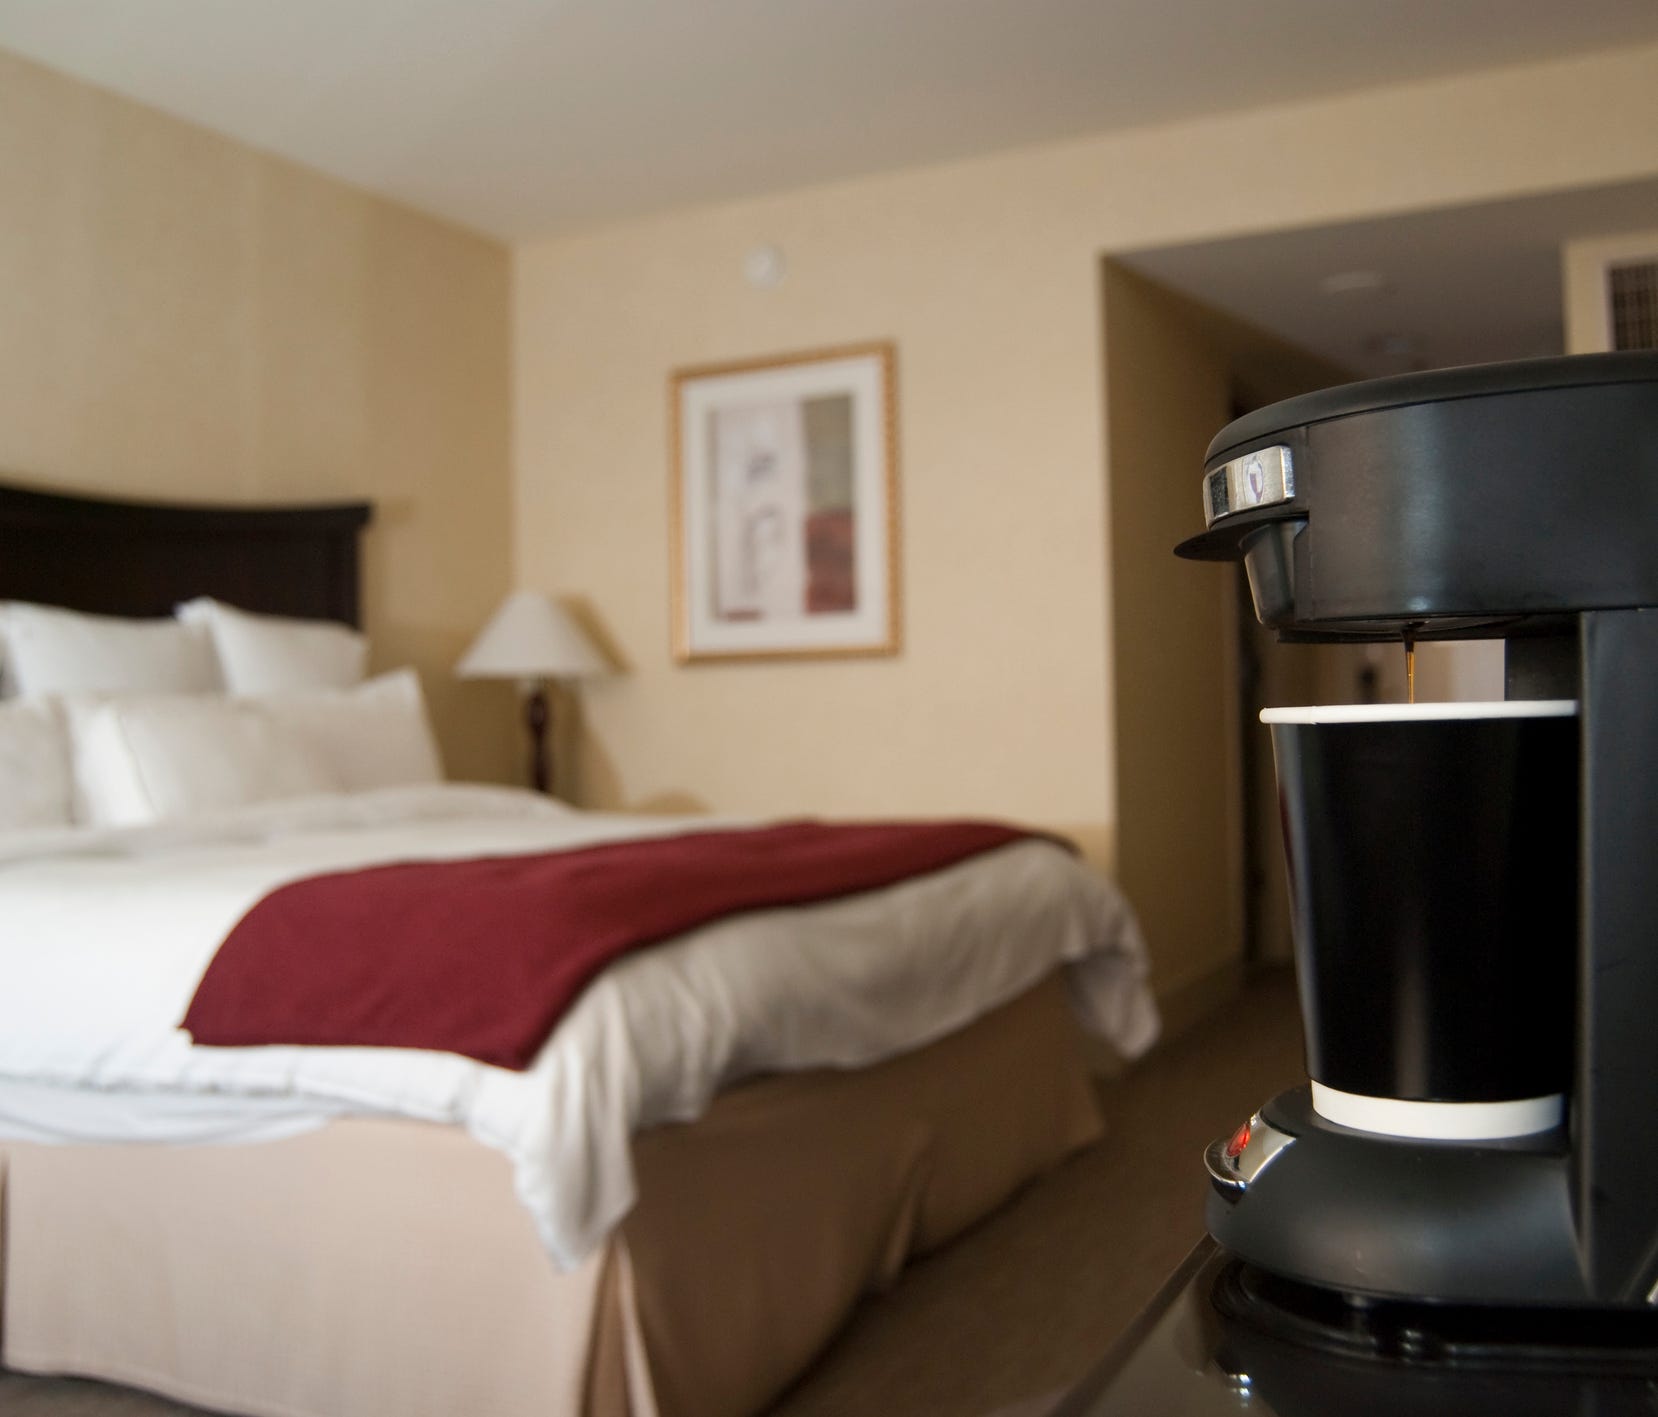 Many hotel rooms feature a selection of mediocre coffees and a coffeemaker that's difficult to use and only makes a beverage one tiny cup at a time.